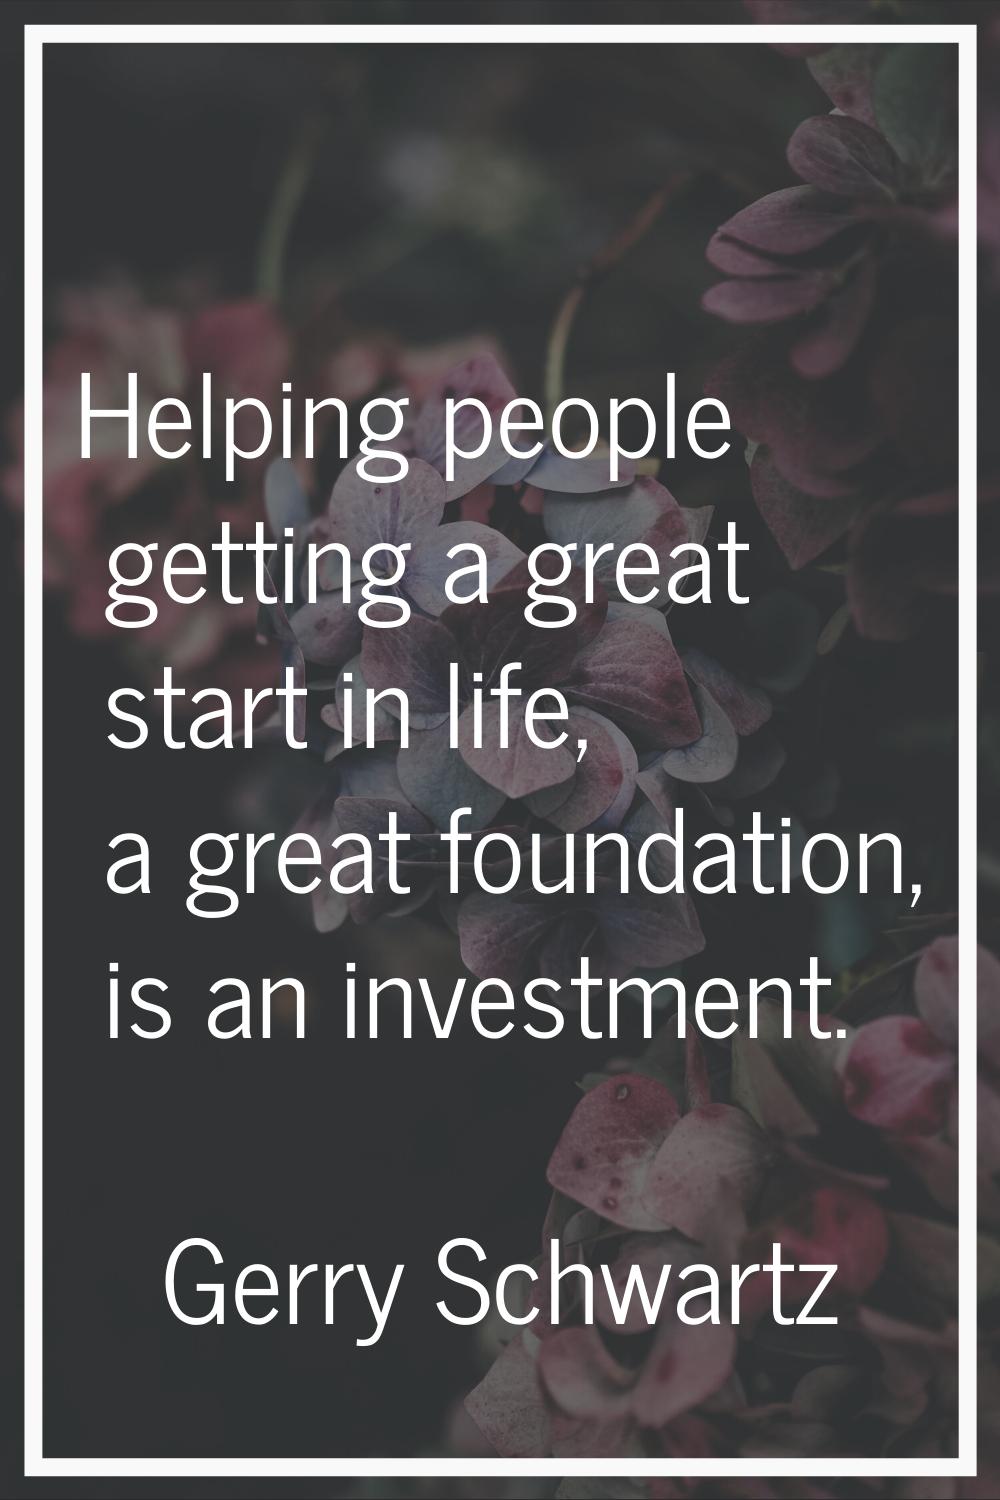 Helping people getting a great start in life, a great foundation, is an investment.